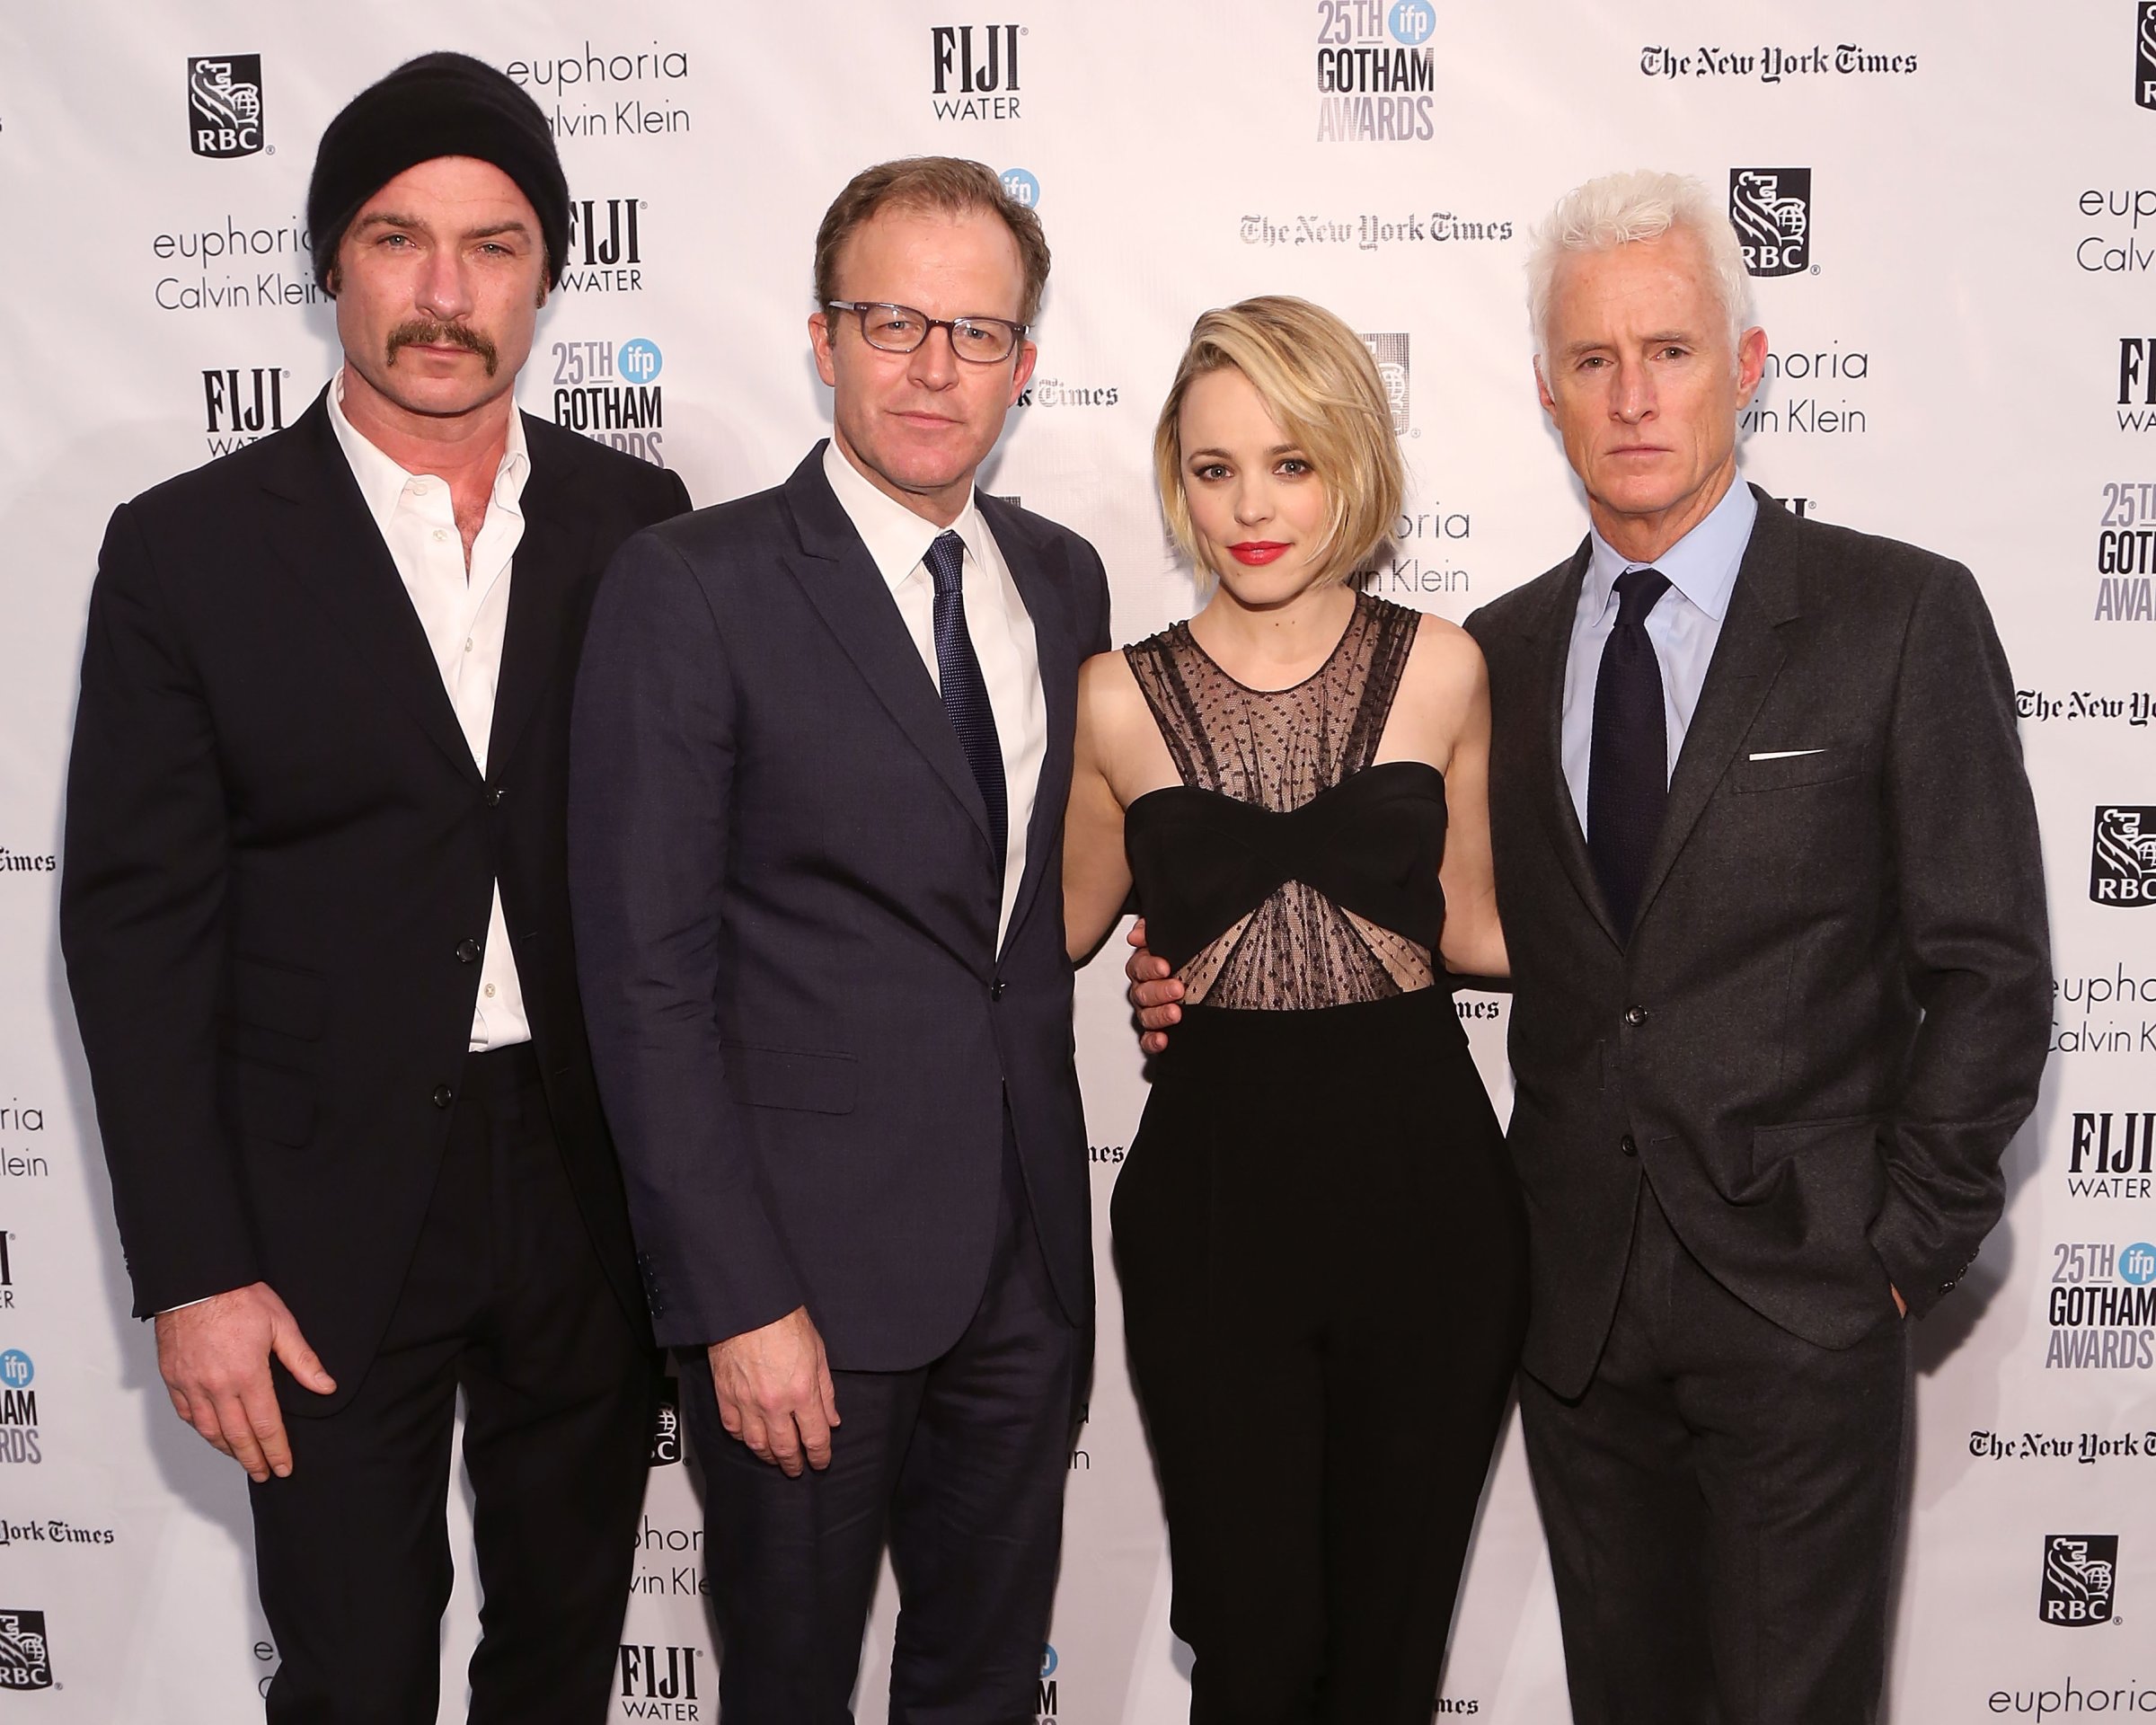 (L-R) Liev Schreiber, Thomas McCarthy, Rachel McAdams, and John Slattery attend the 25th Annual Gotham Independent Film Awards on November 30, 2015 in New York City.